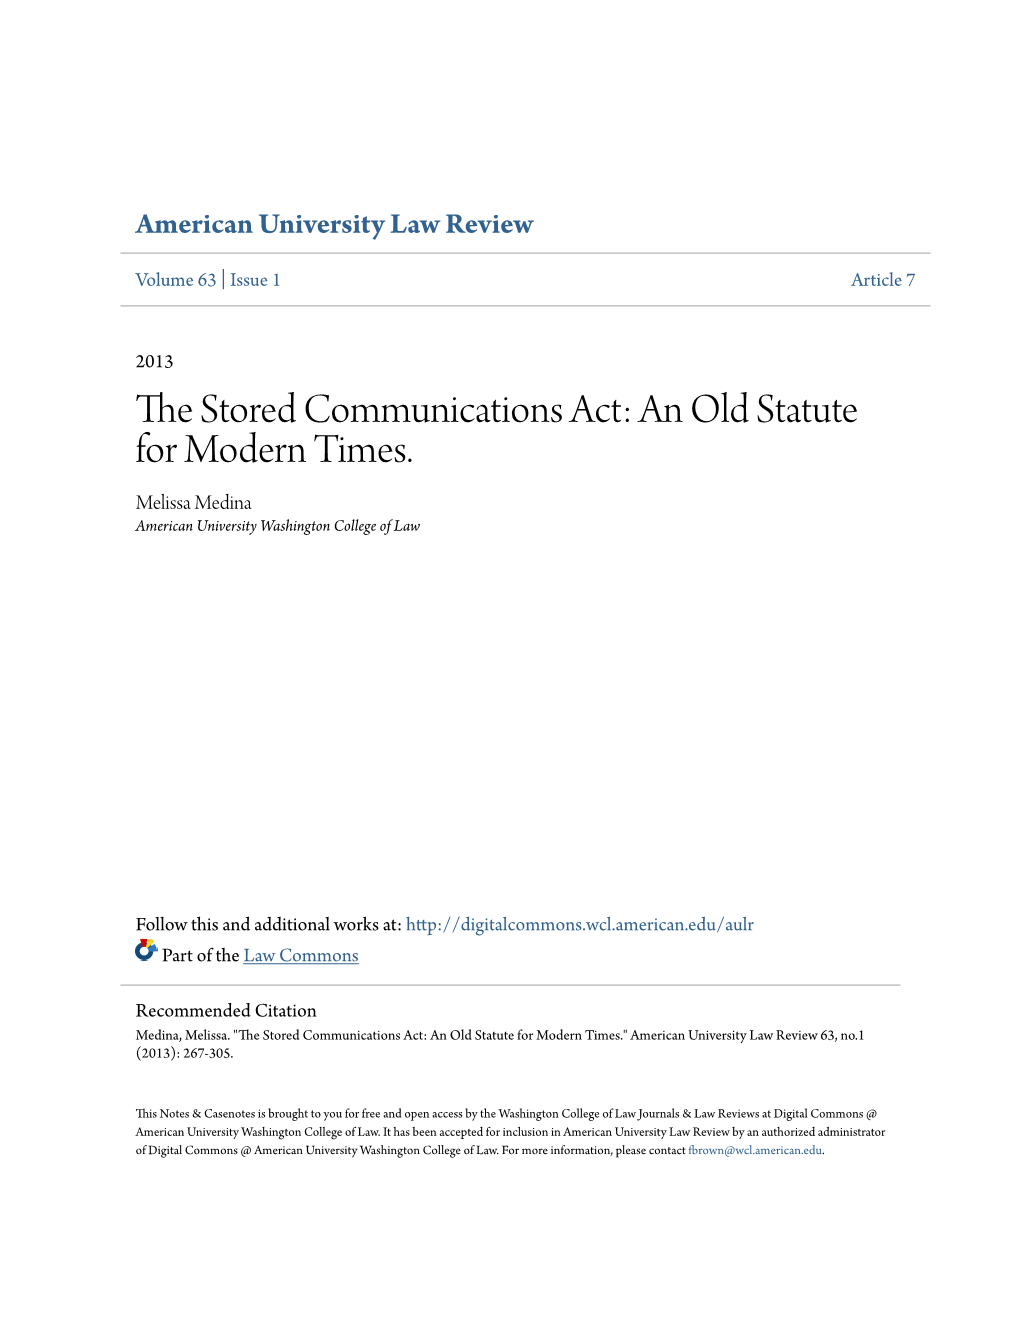 The Stored Communications Act: an Old Statute for Modern Times